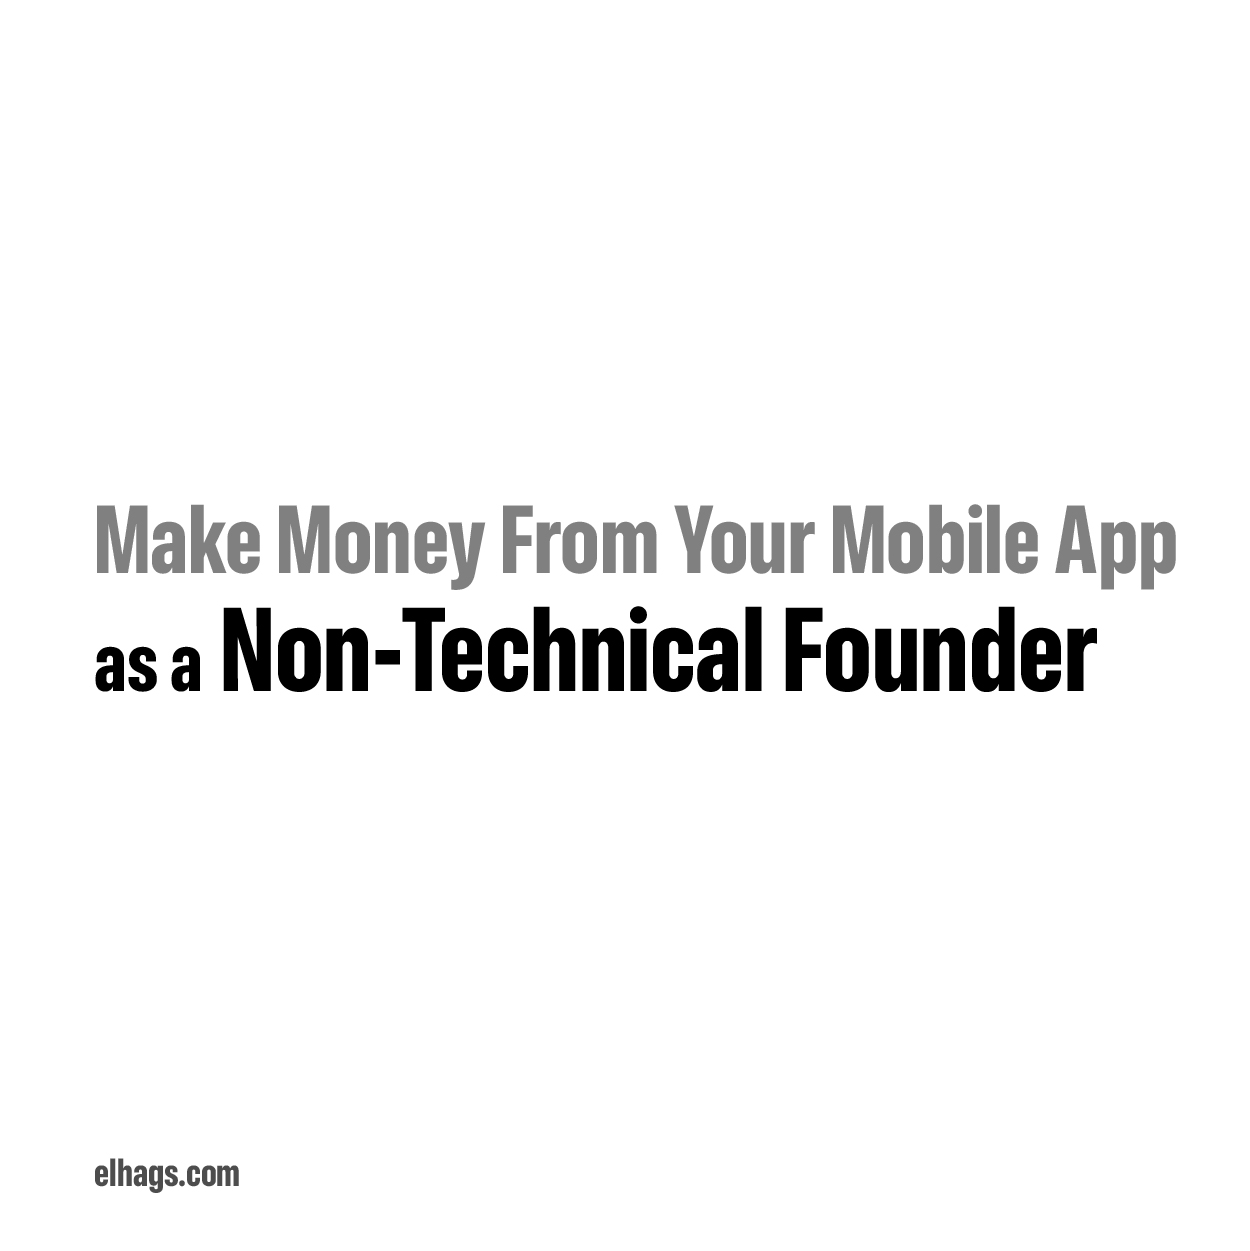 10 Ways to Make Money From Your Mobile App